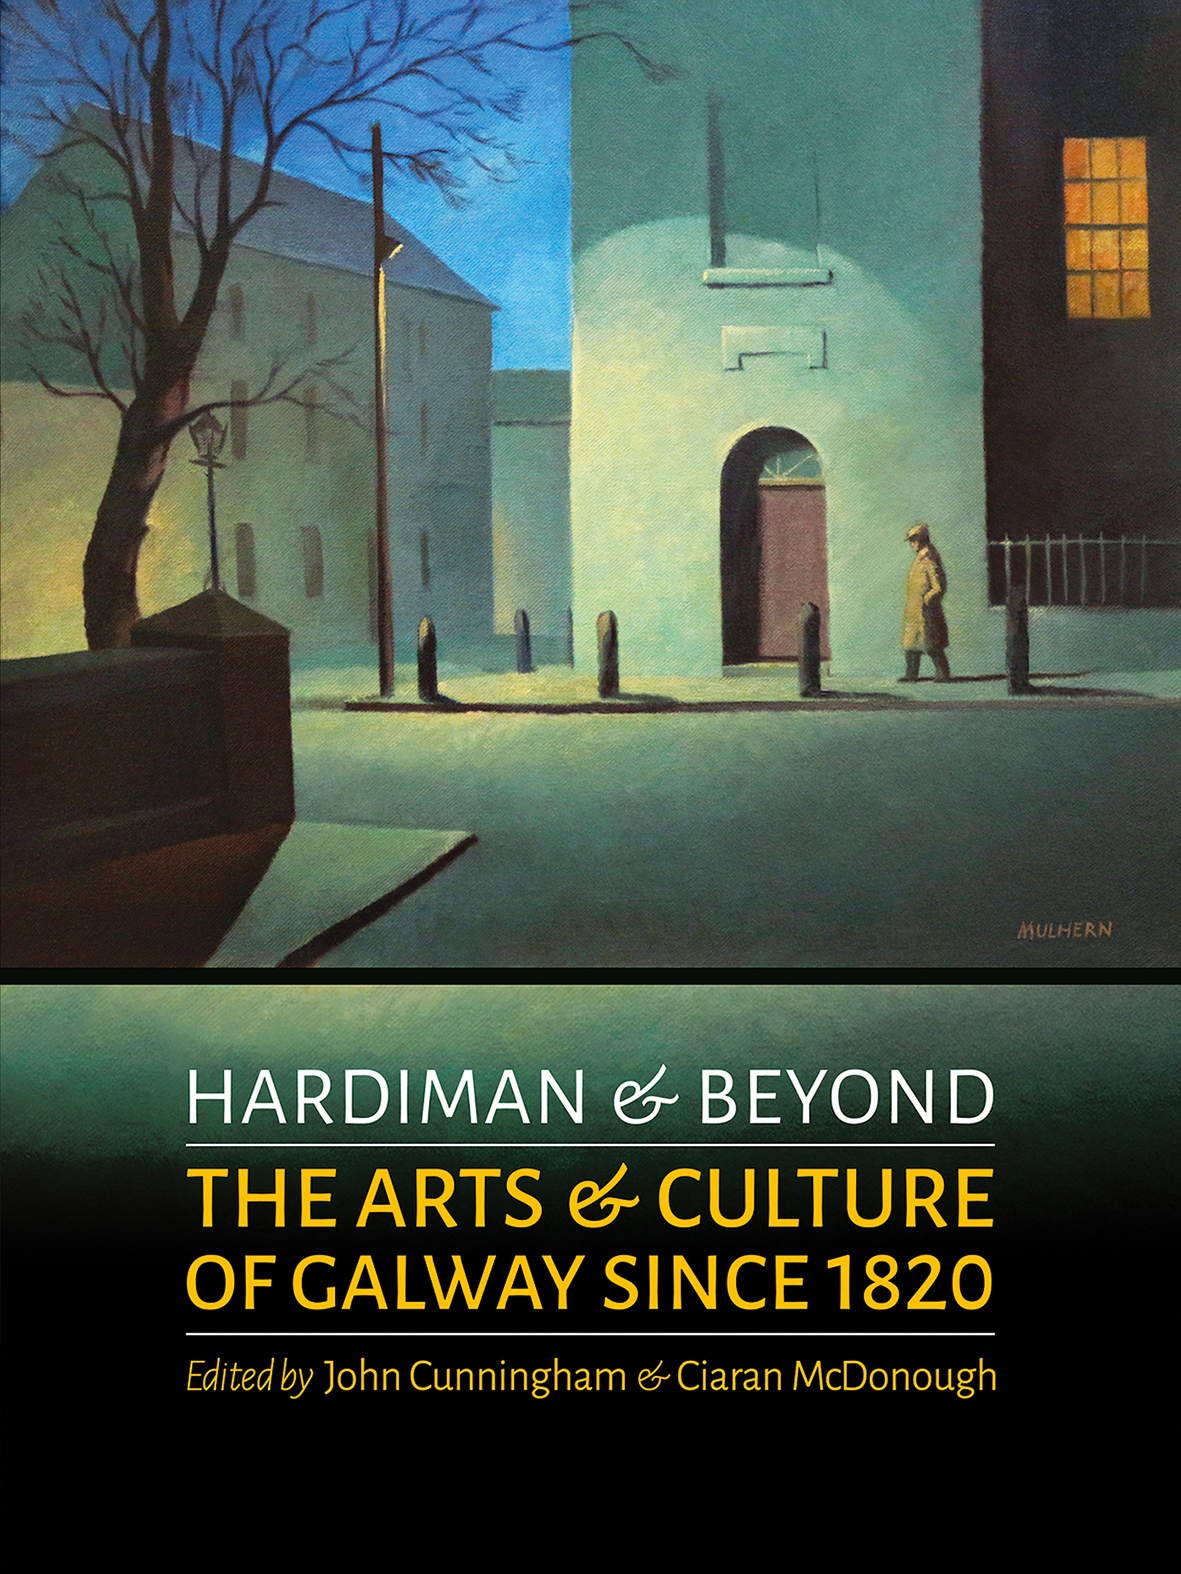 Hardiman & Beyond: The Arts and Culture of Galway Since 1820 by John Cunningham & Ciaran Mc Donagh